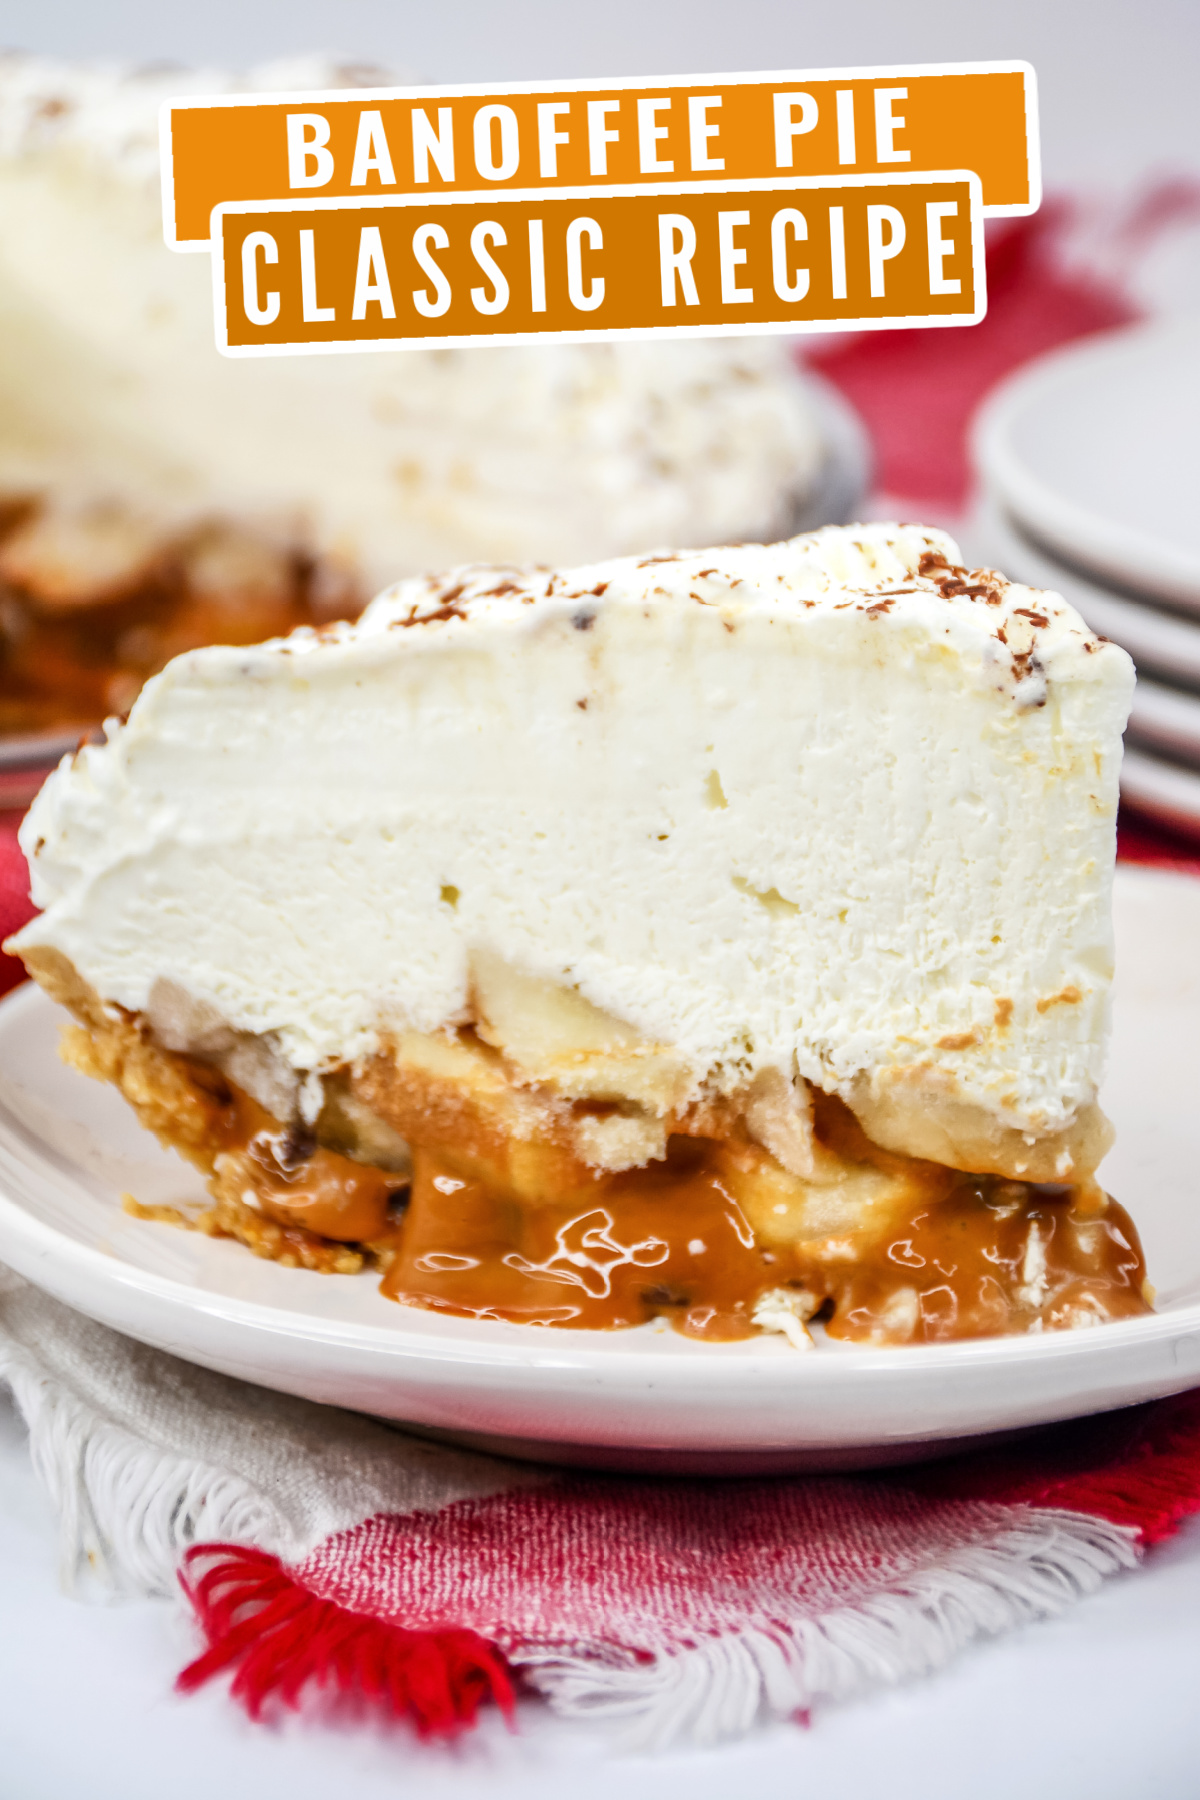 A classic English dessert, this banoffee pie recipe is easy to make and combines the taste of toffee, bananas, and cream into a tasty treat.